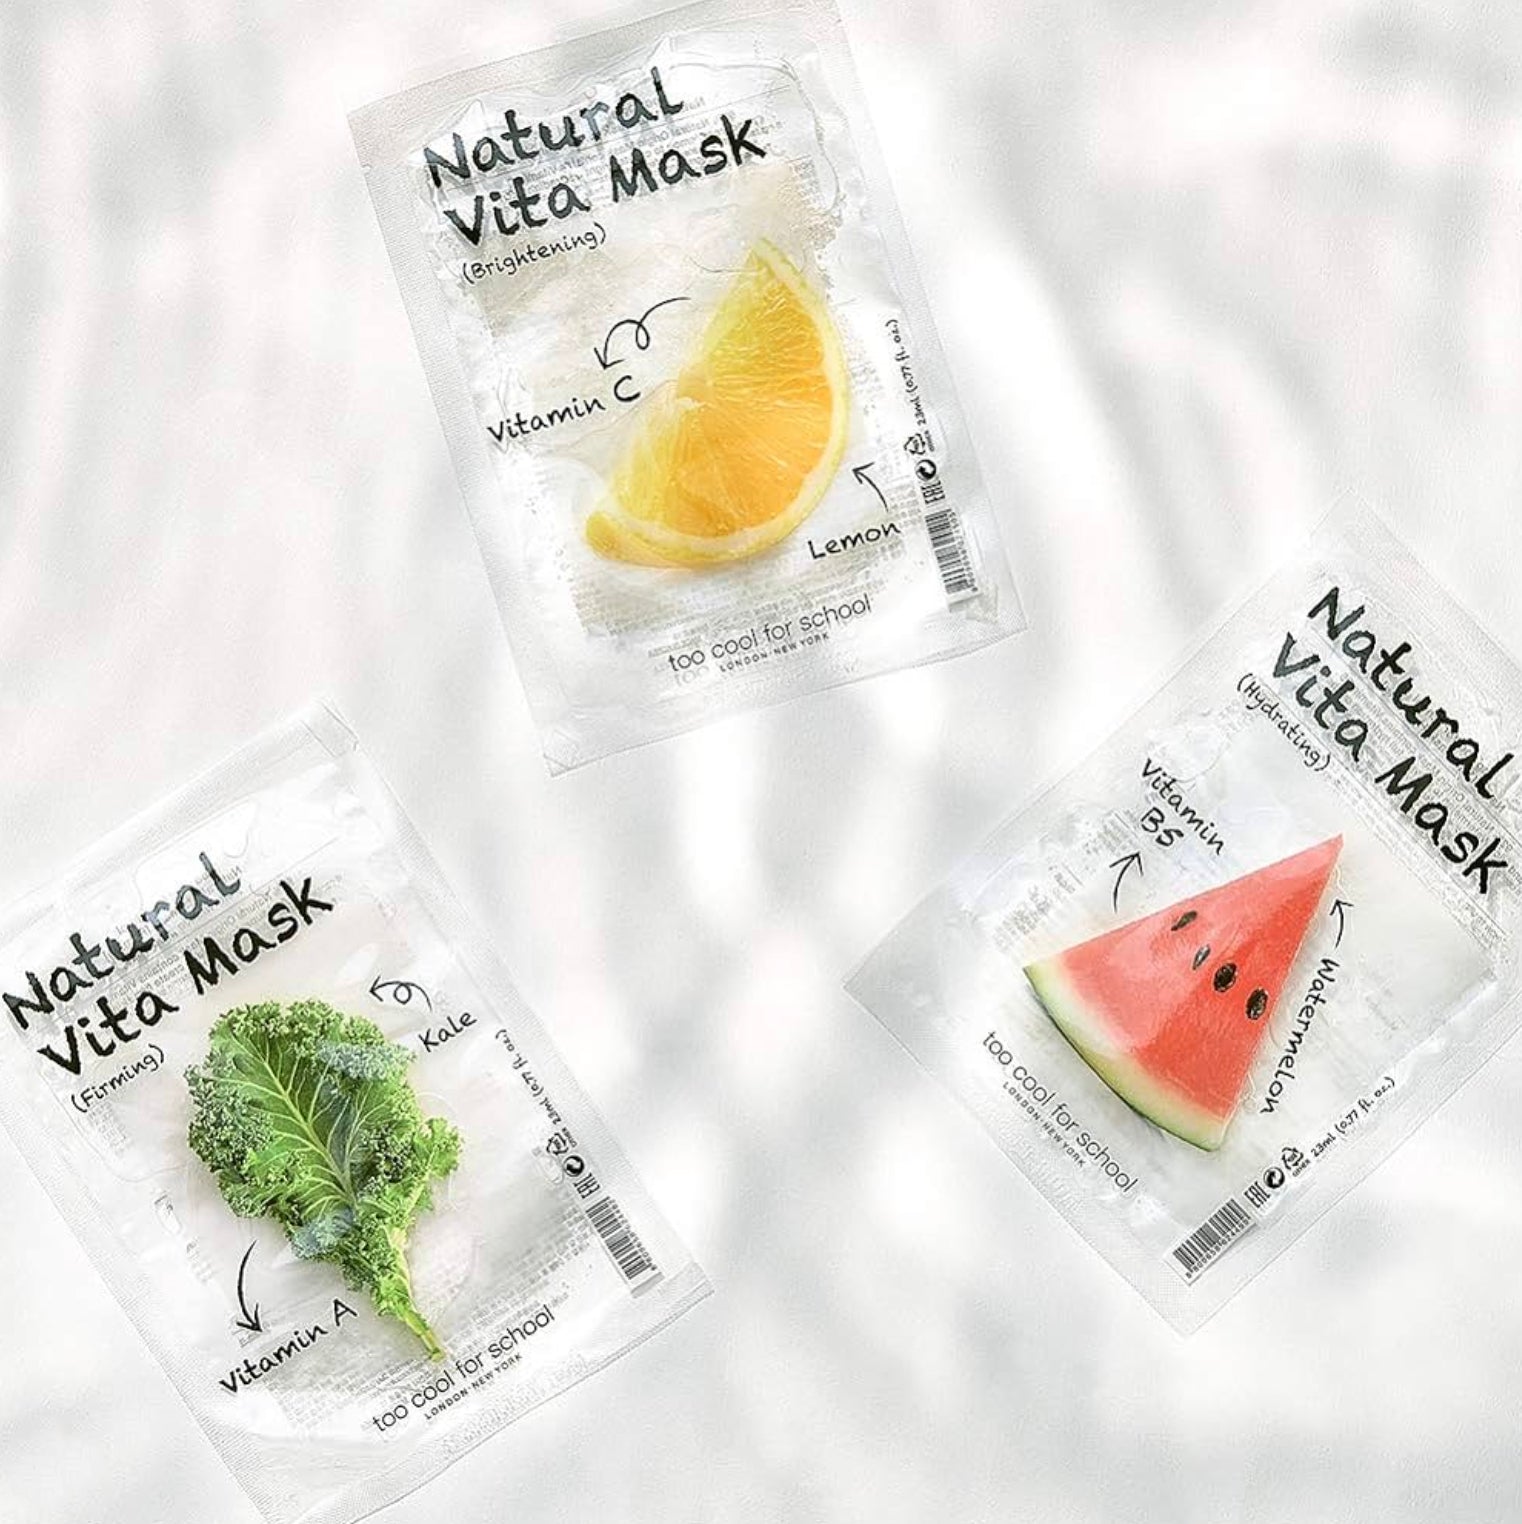 Too Cool For School Natural Vita Mask Hydrating (Watermelon) Sheet